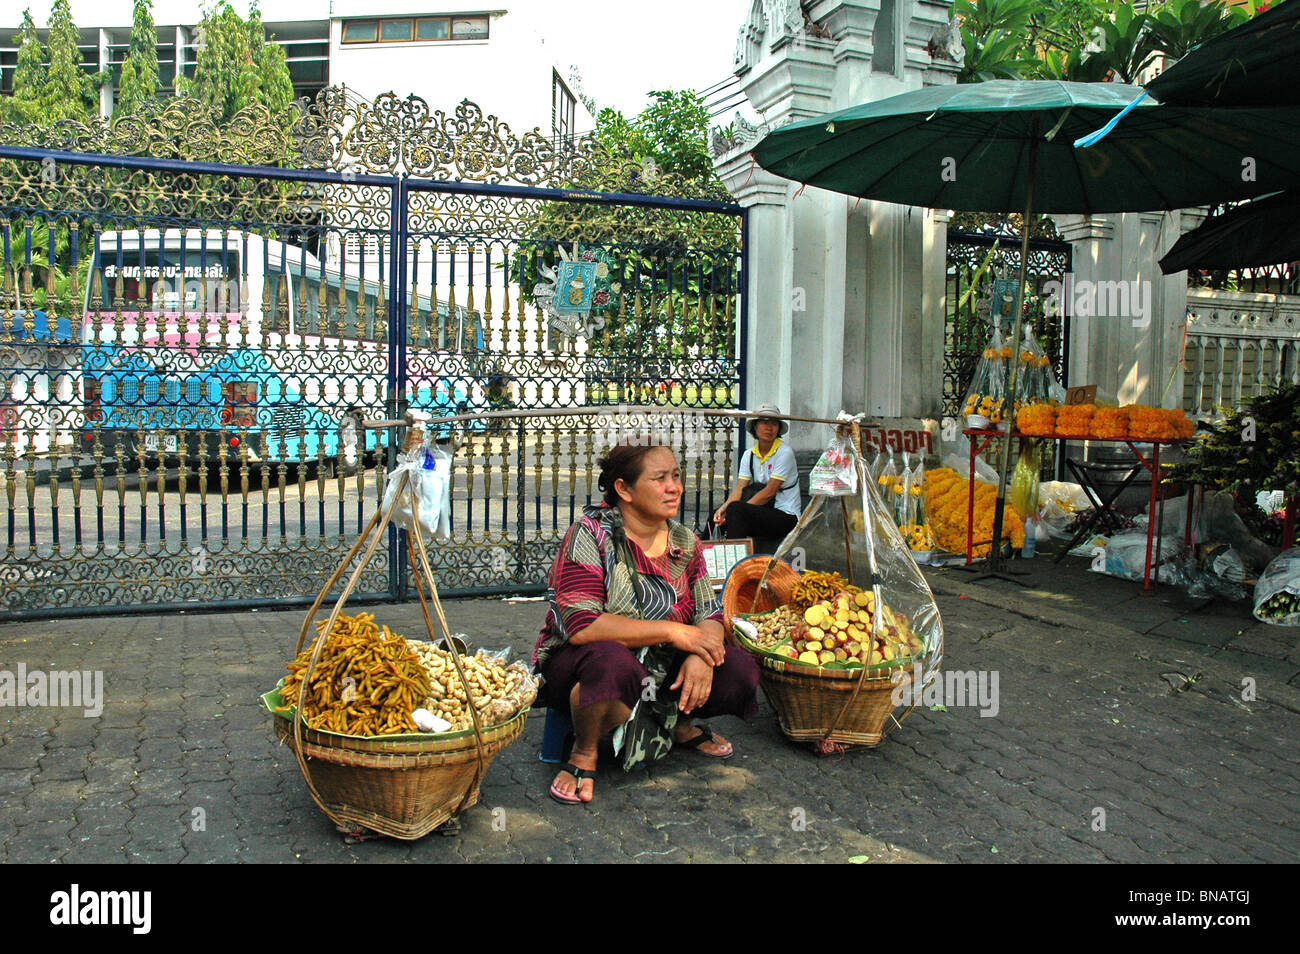 Seated Woman selling fruit from two baskets Bangkok Thailand Stock Photo